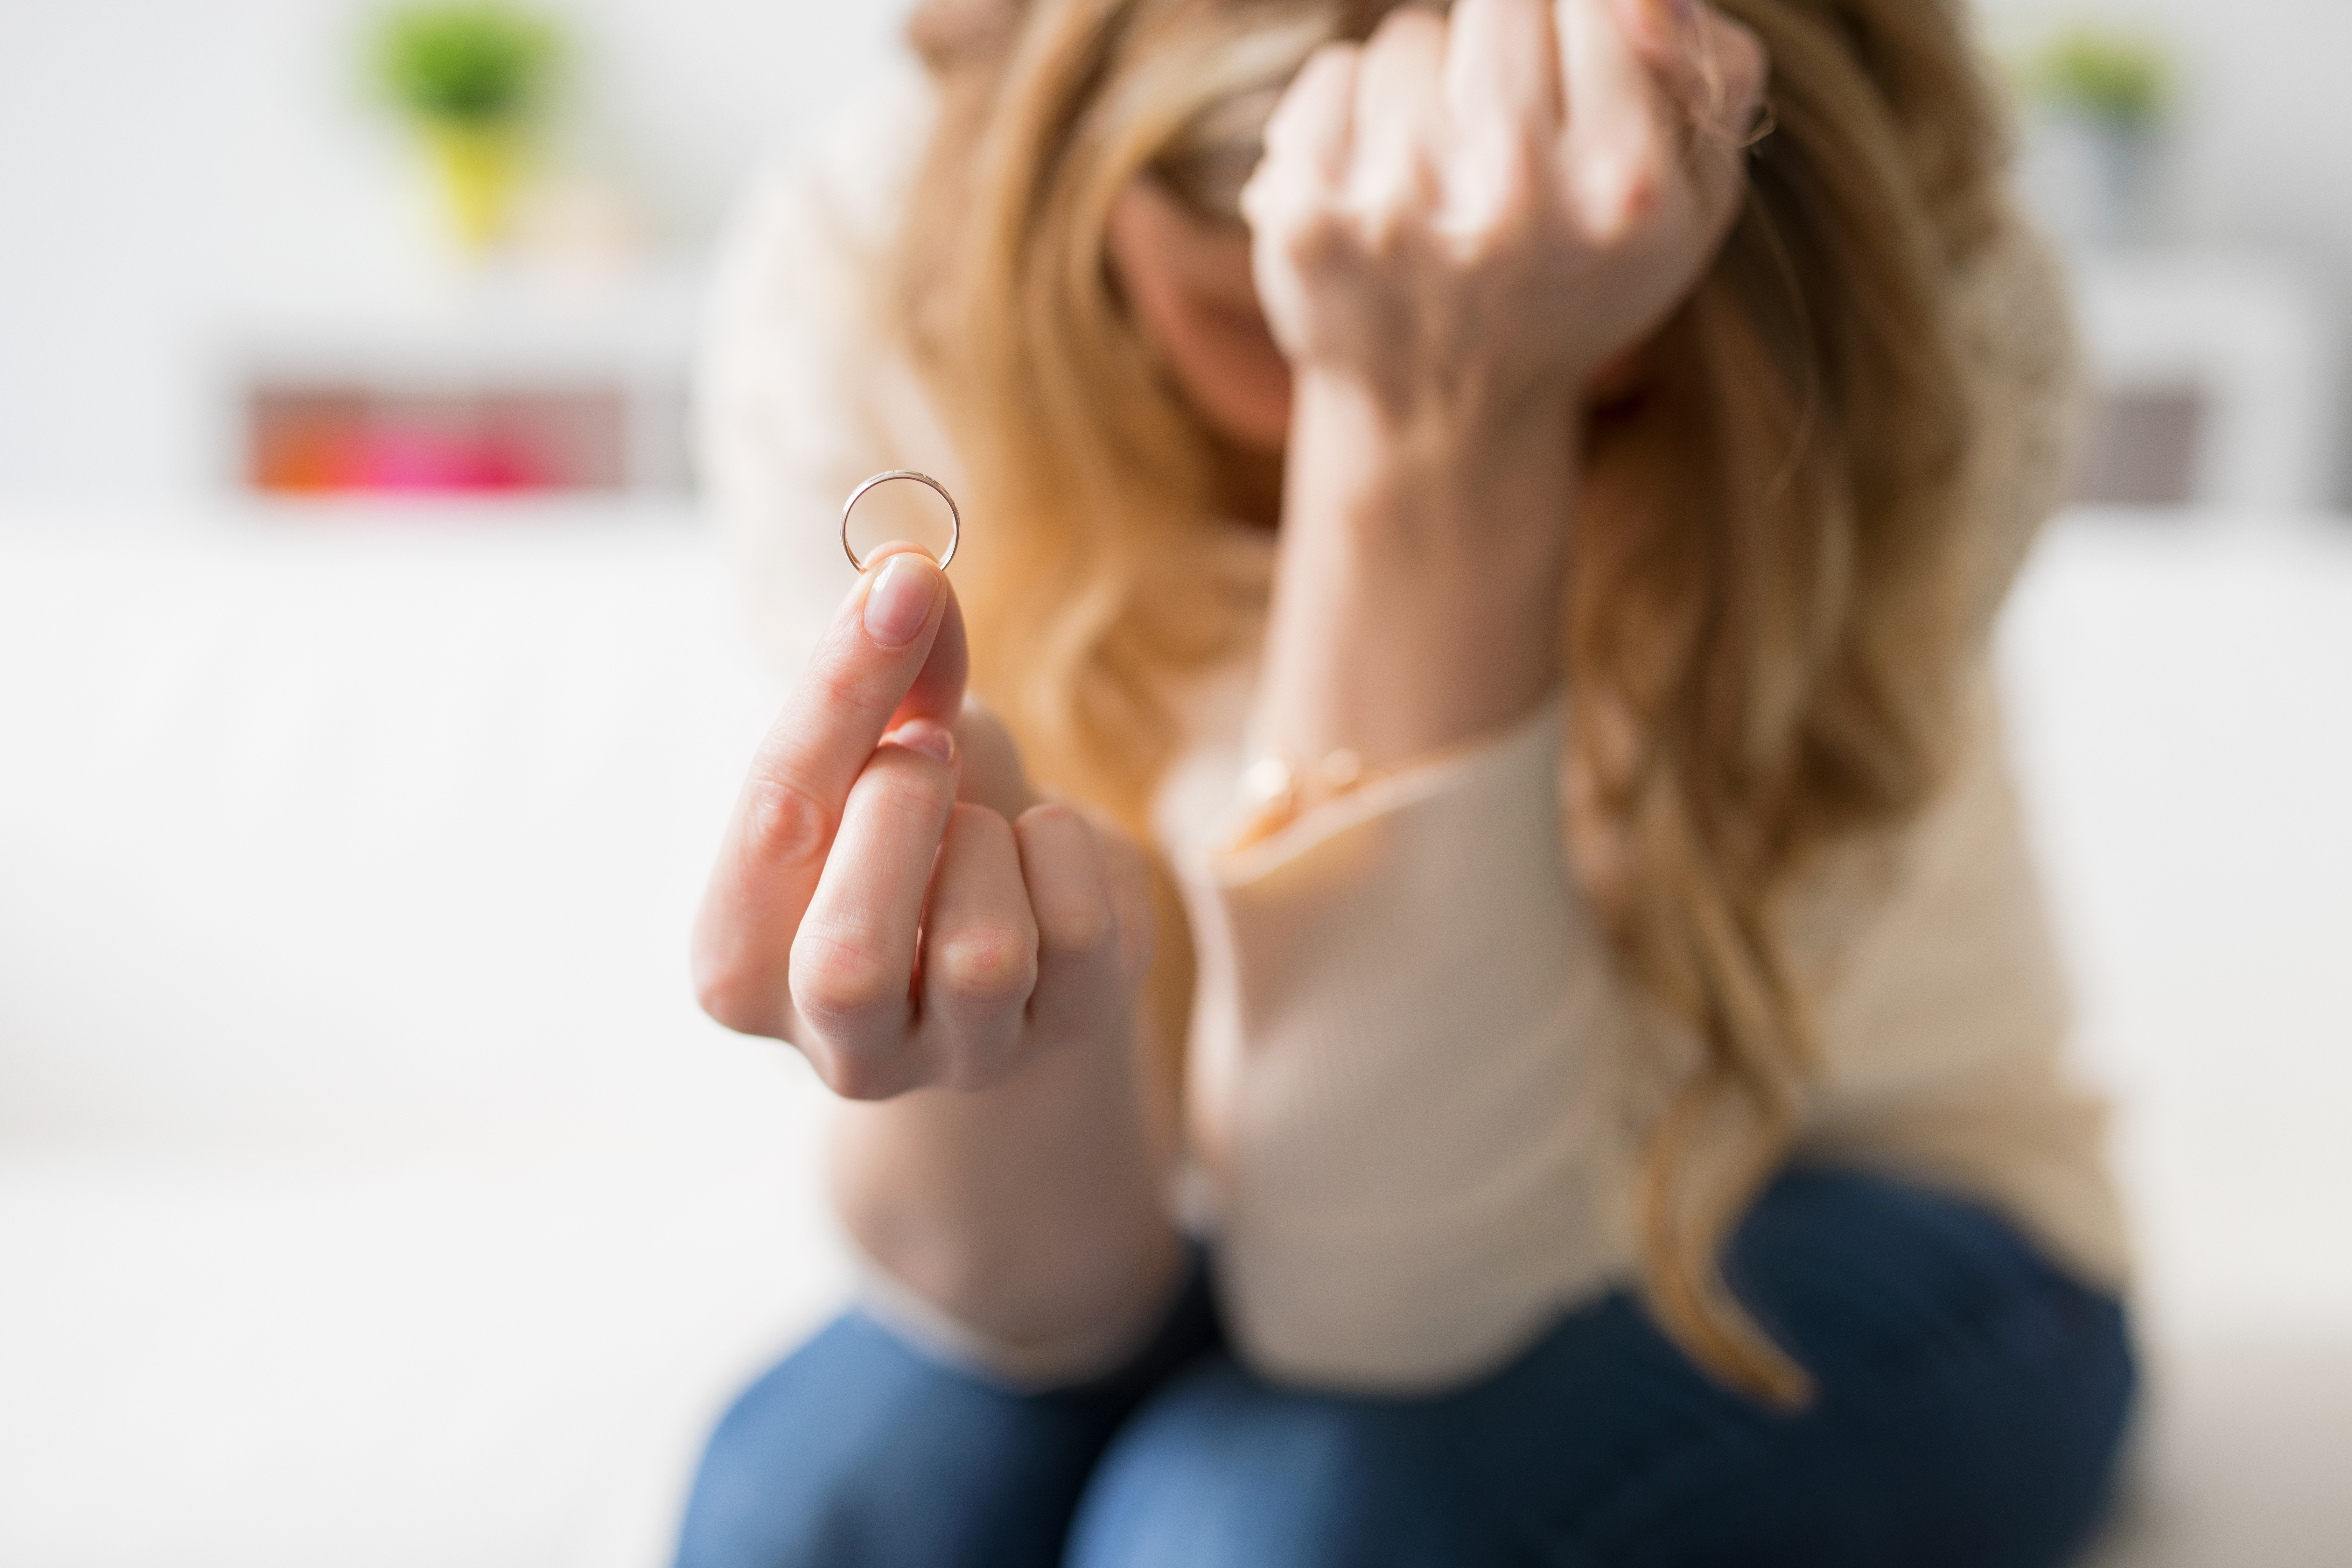 A woman in despair holding out her wedding ring | Source: Shutterstock